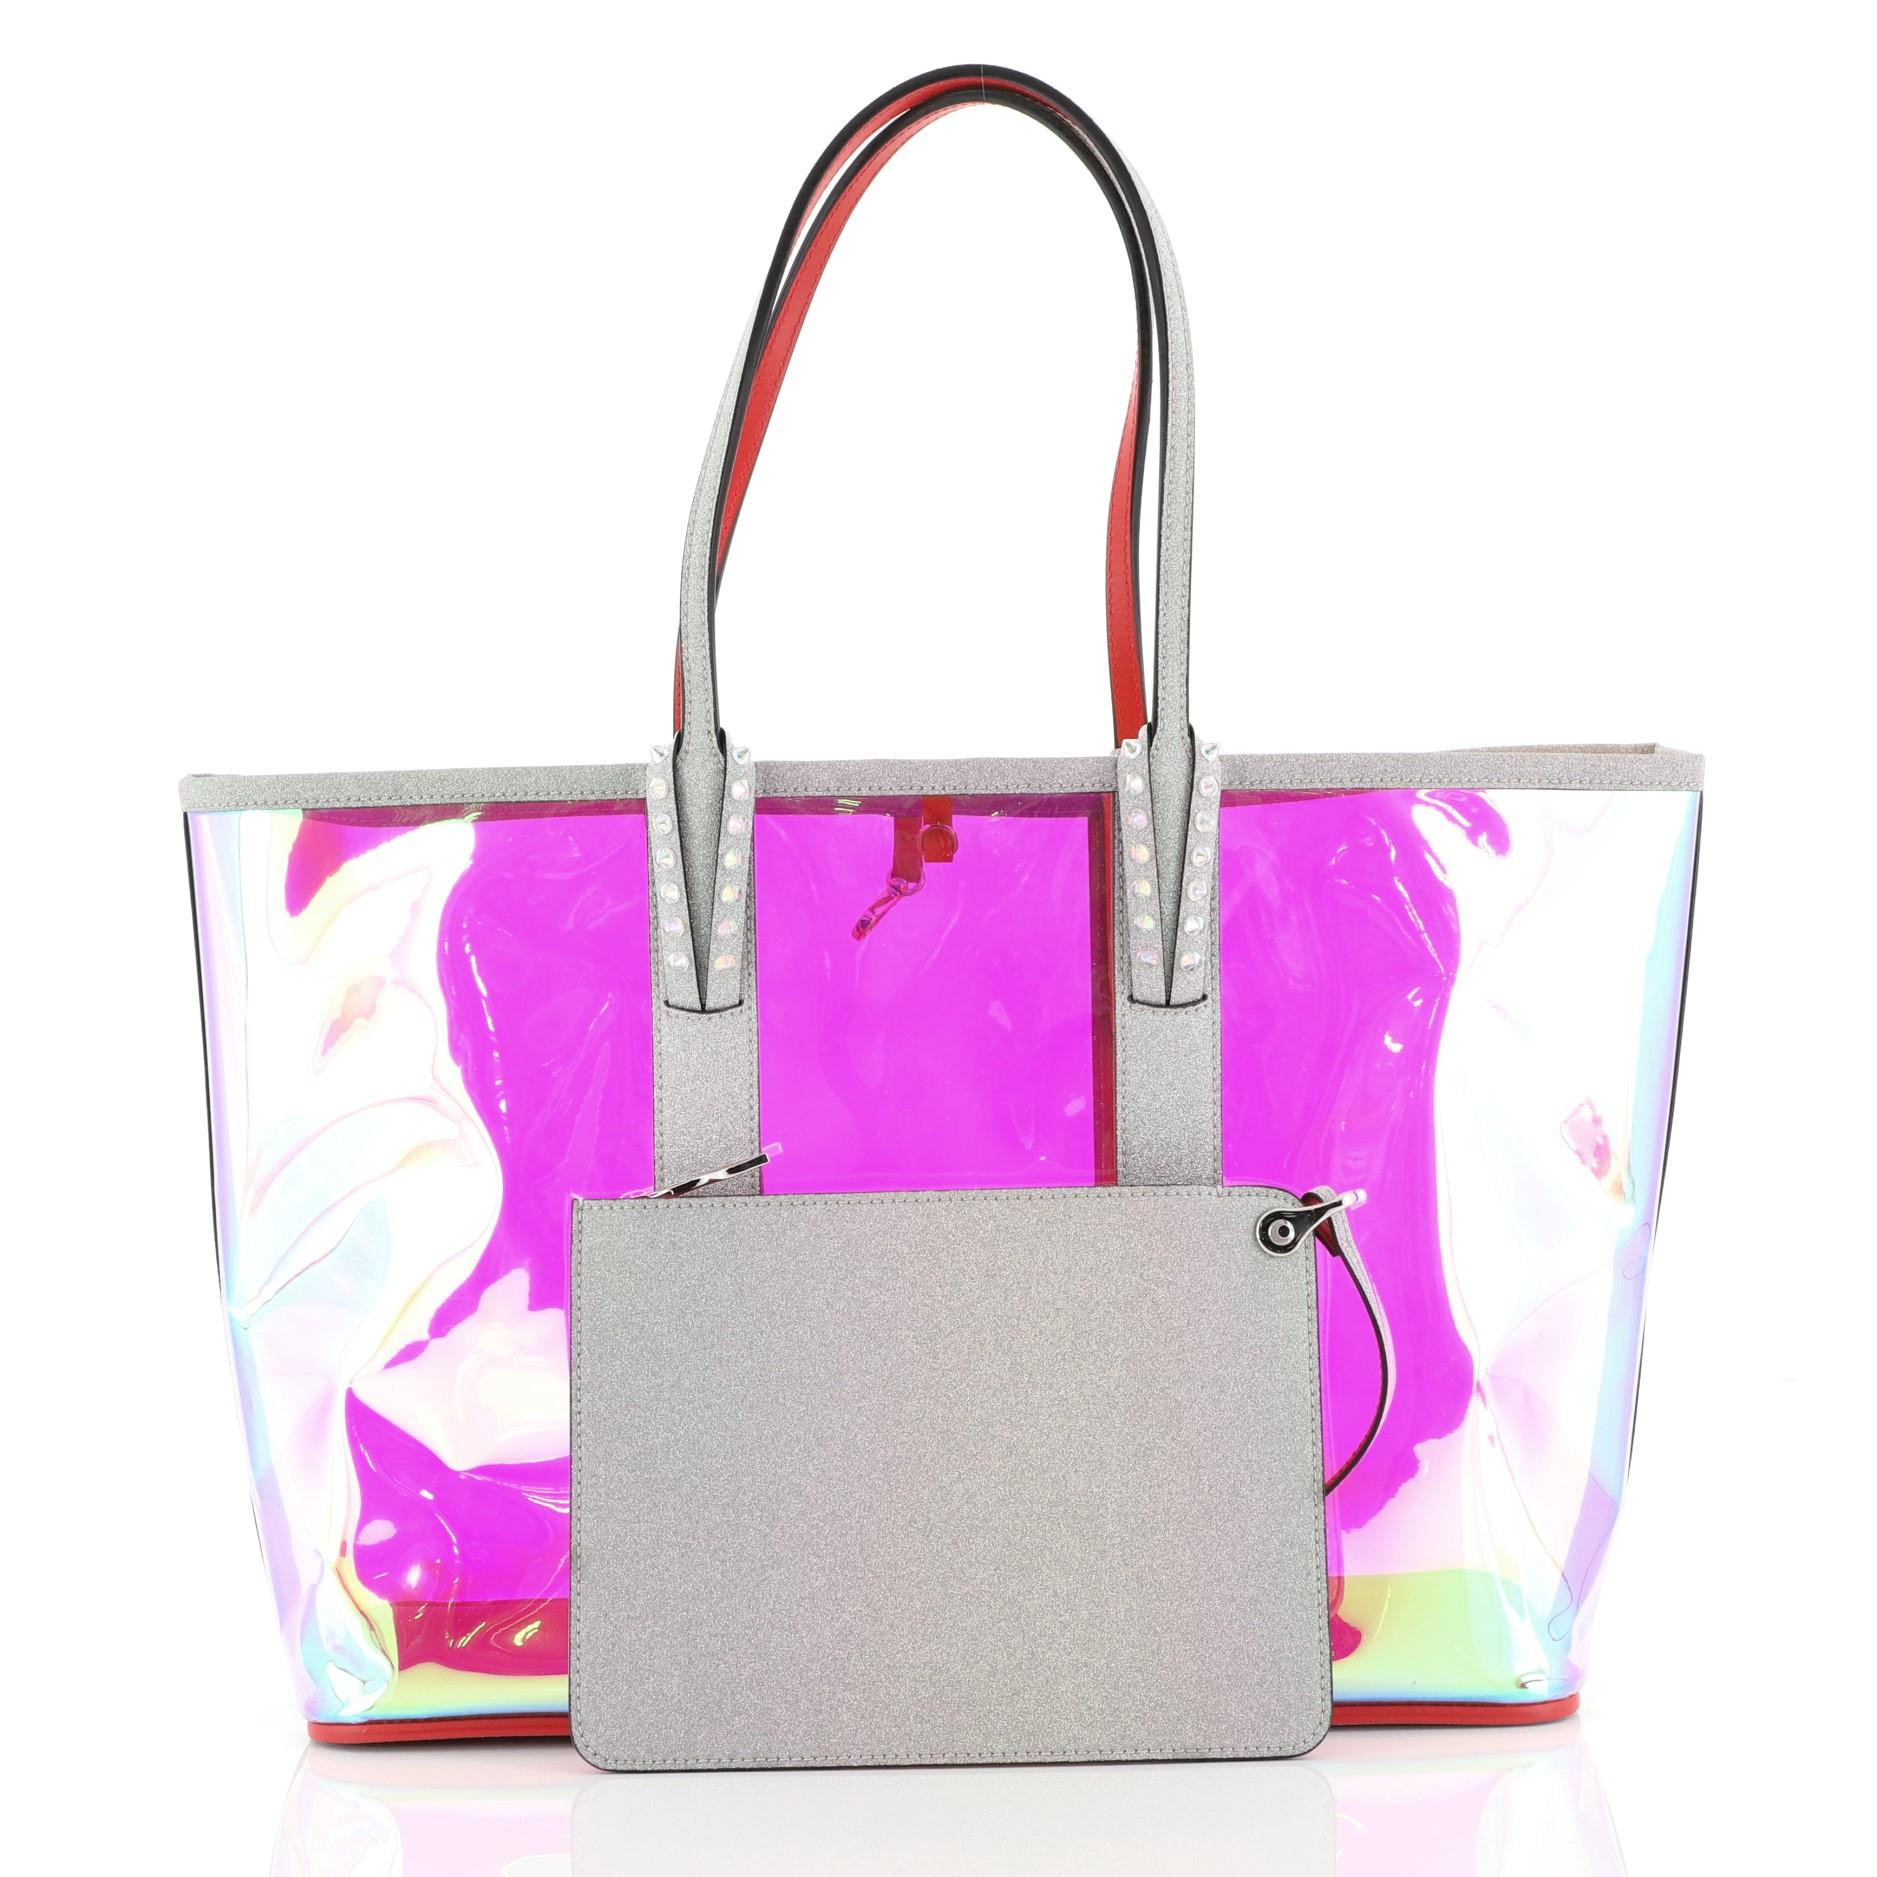 This Christian Louboutin Cabata East West Tote PVC Large, crafted in multicolor and clear PVC, features flat leather shoulder strap with studded loops and silver-tone hardware. It opens to a clear PVC interior. 

Estimated Retail Price: